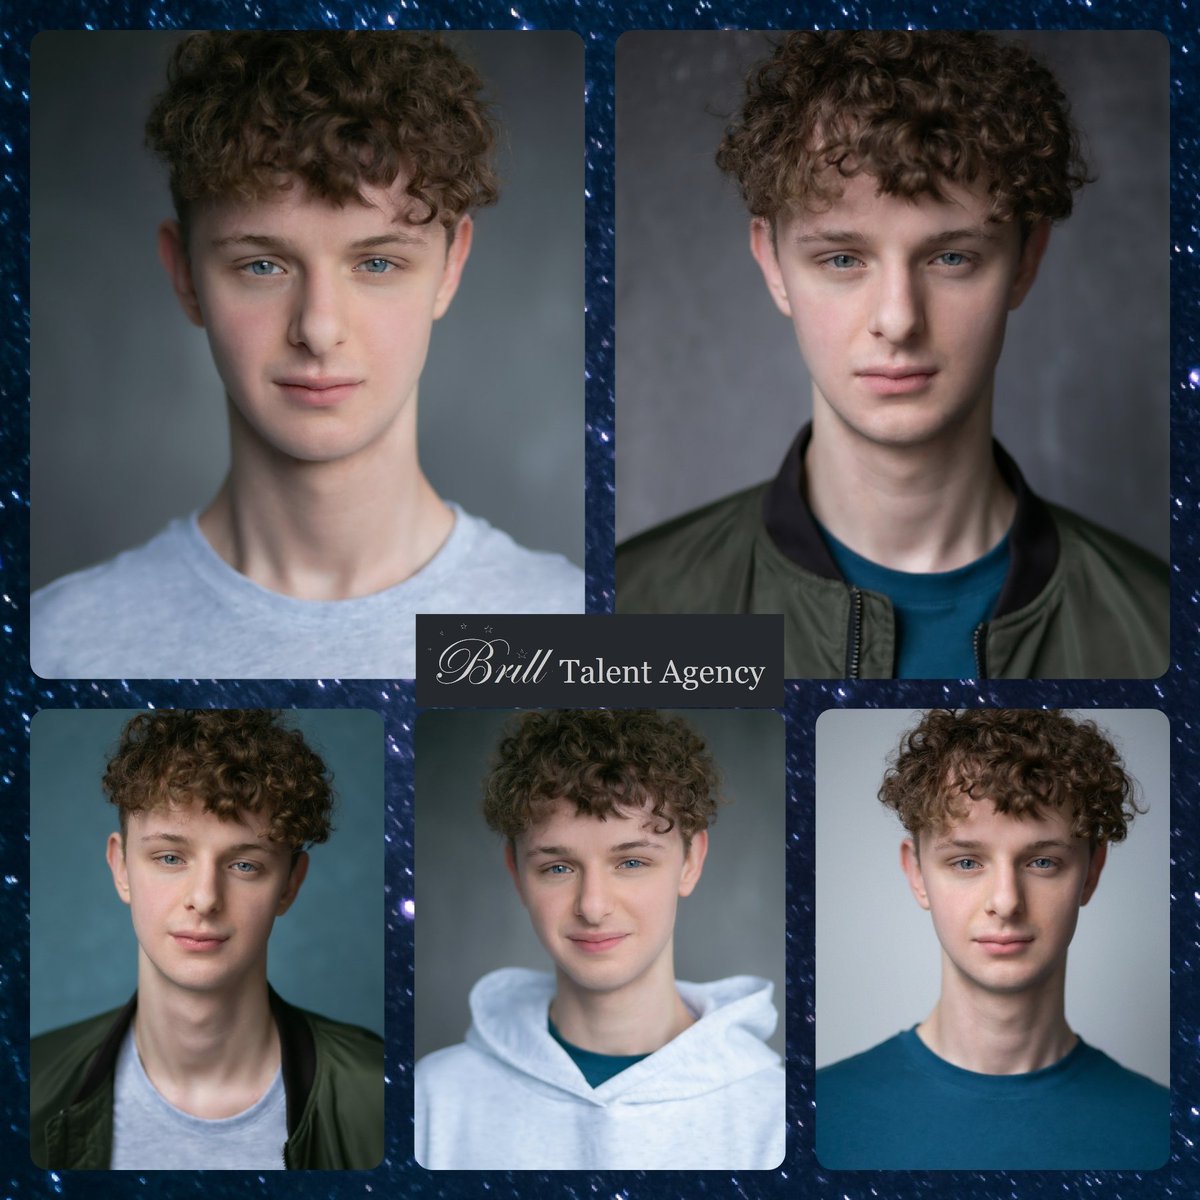 #newheadshots for DYLAN. Again, a great selection of new looks / characters including mean and moody! Taken by Manchester based photographer David John. 
.
#headshots #actorsheadshots #brilltalentagency #Television #Commercials #film #movies